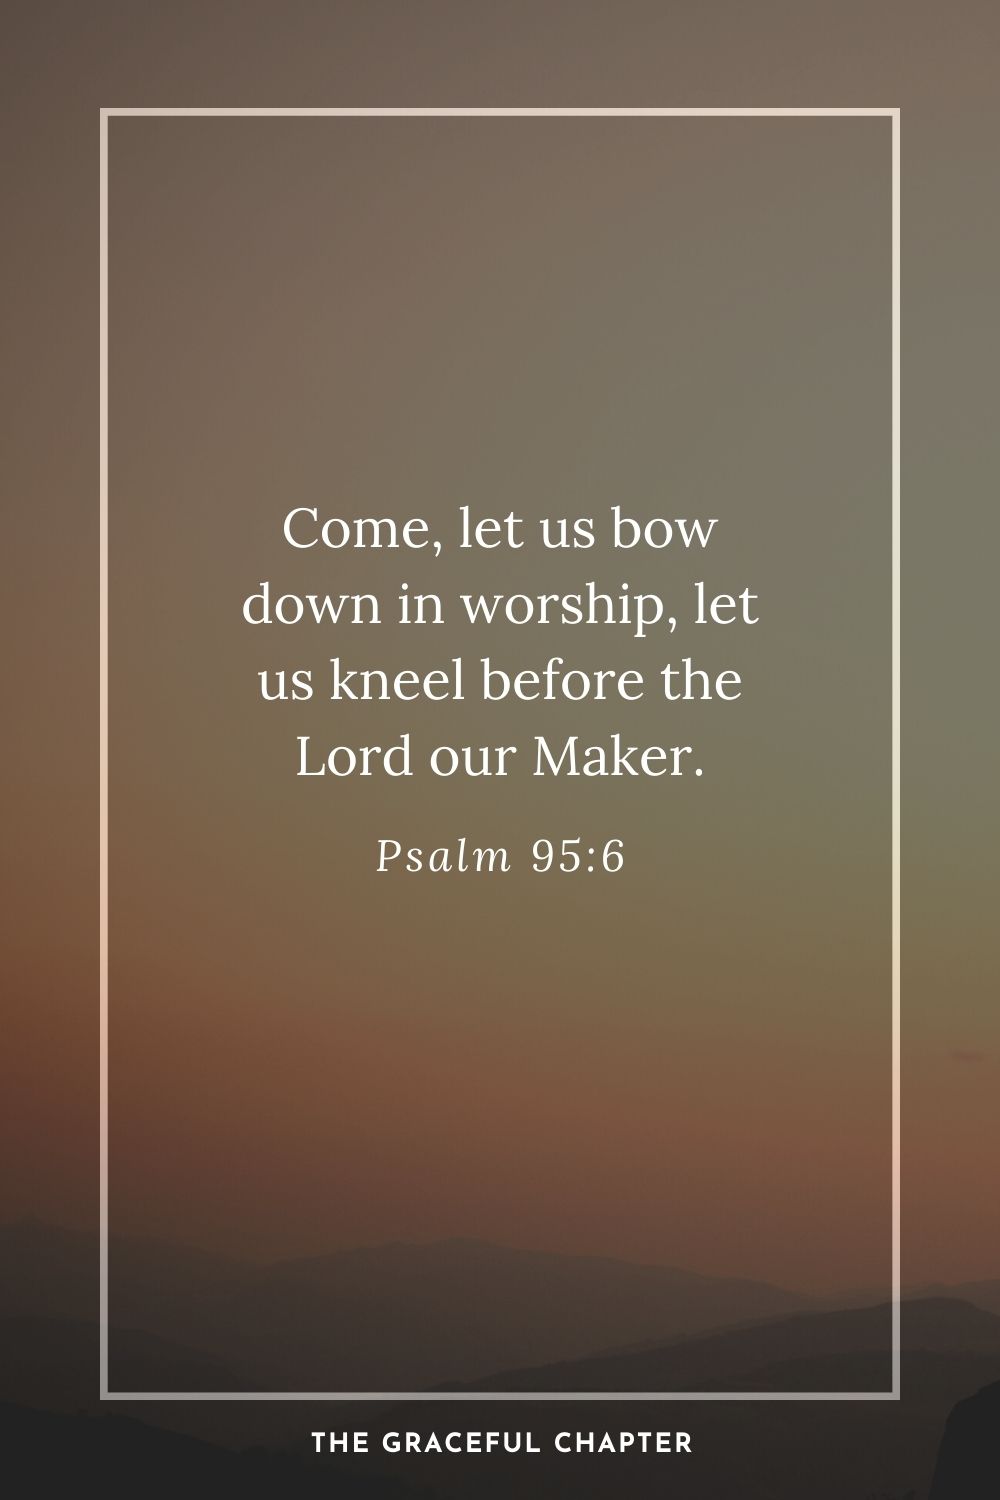 Come, let us bow down in worship, let us kneel before the Lord our Maker. Psalm 95:6